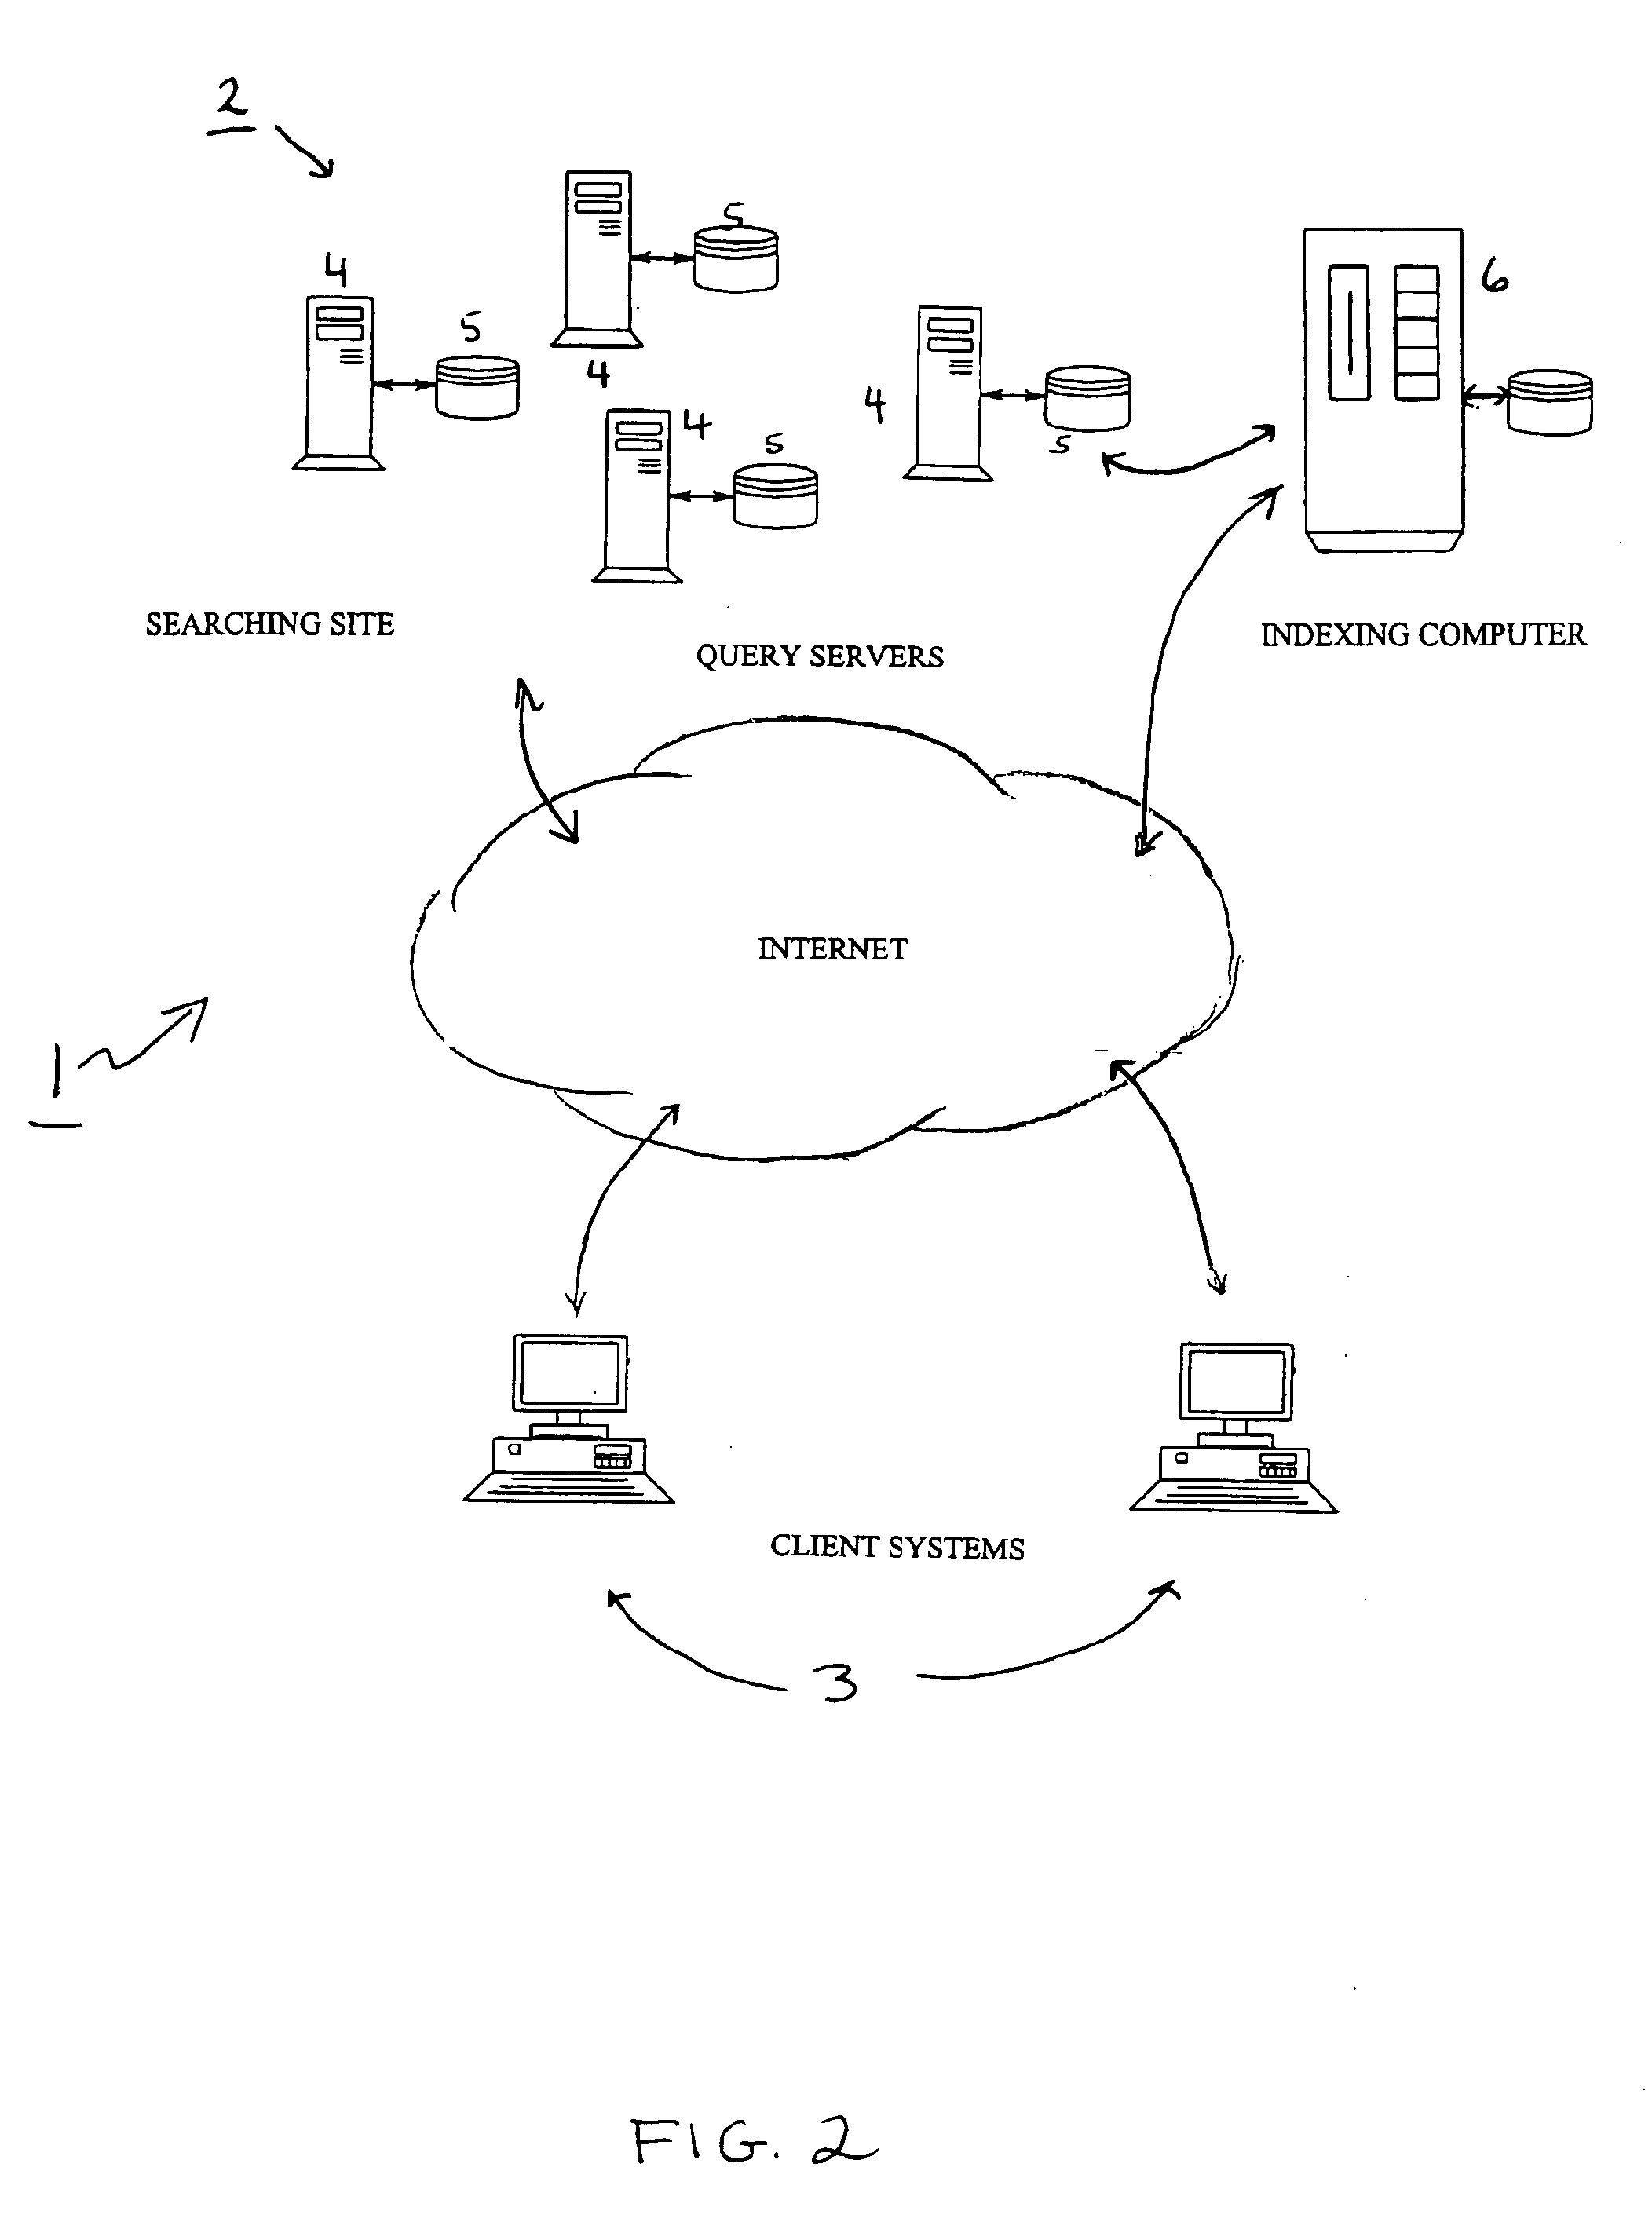 System for fulfilling an information need